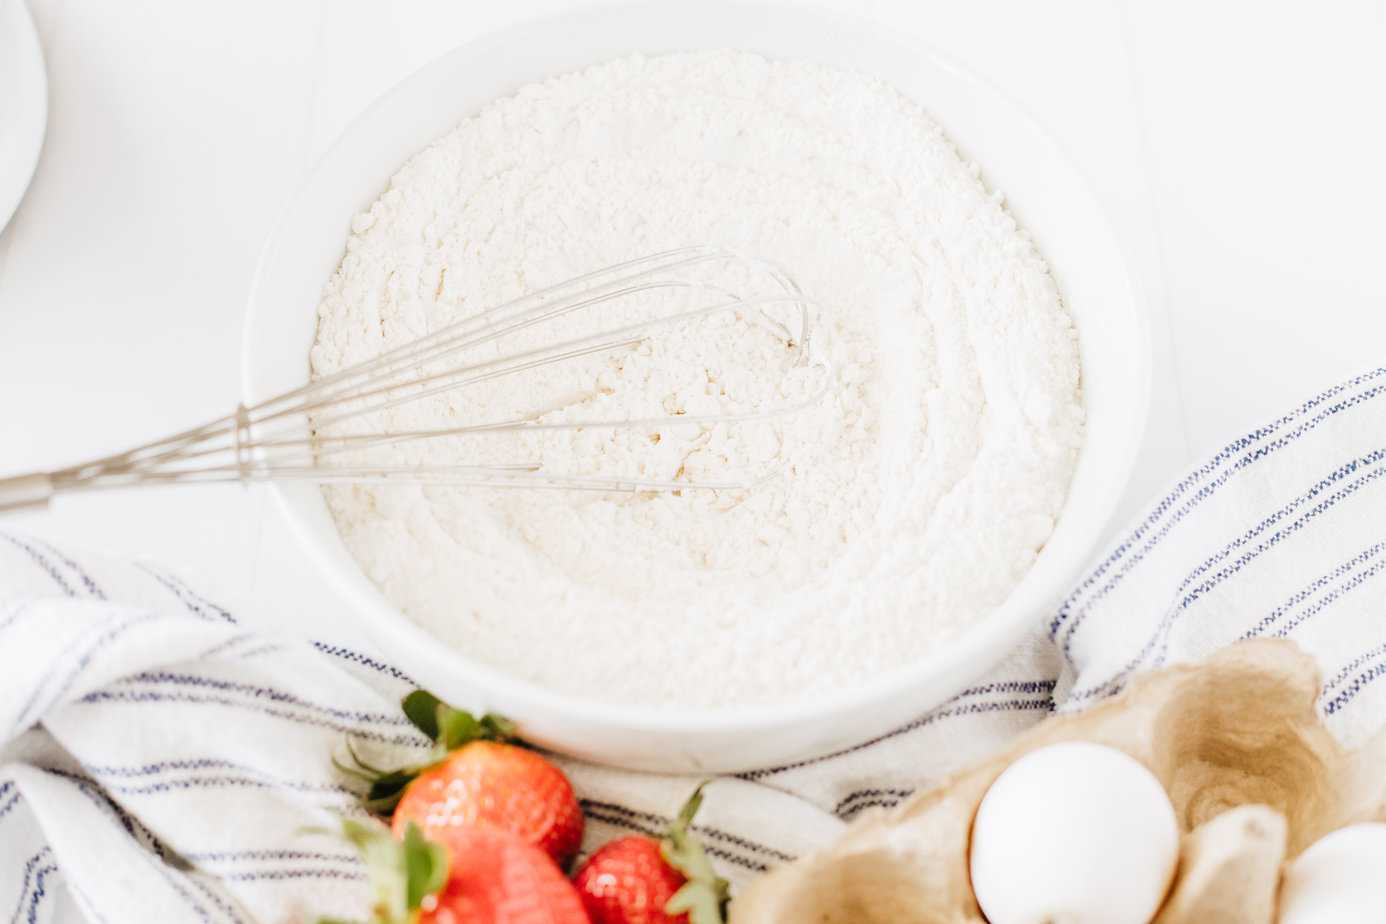  flour, sugar, baking powder, baking soda, and salt whisked together in a bowl